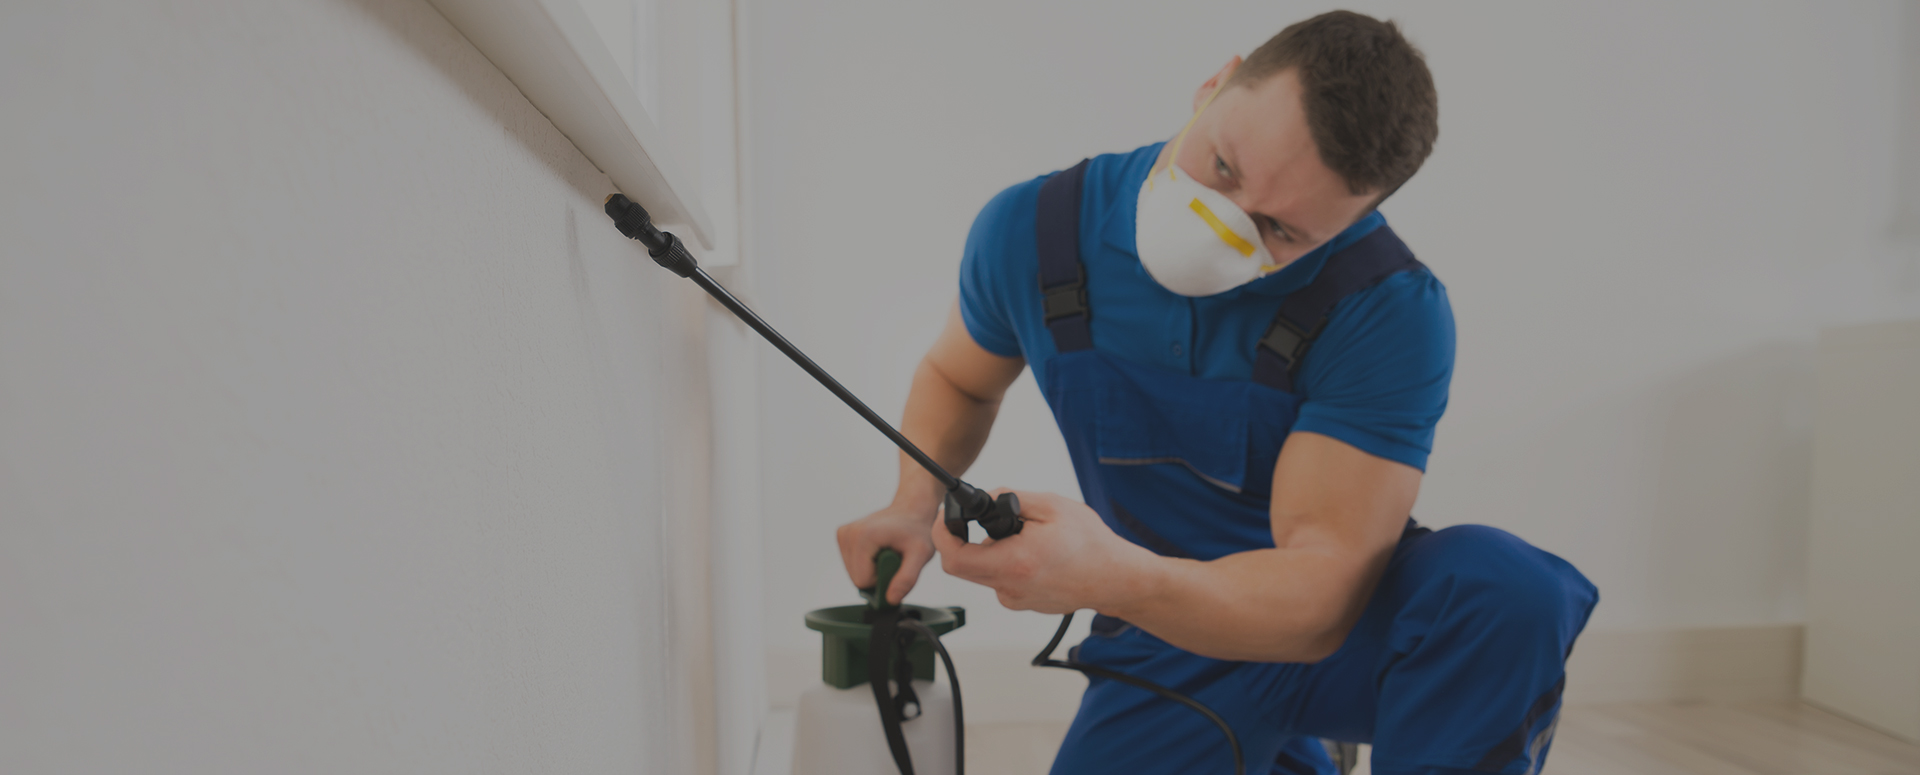 Pest Control Services in Merrick | A1 Howie’s Exterminating